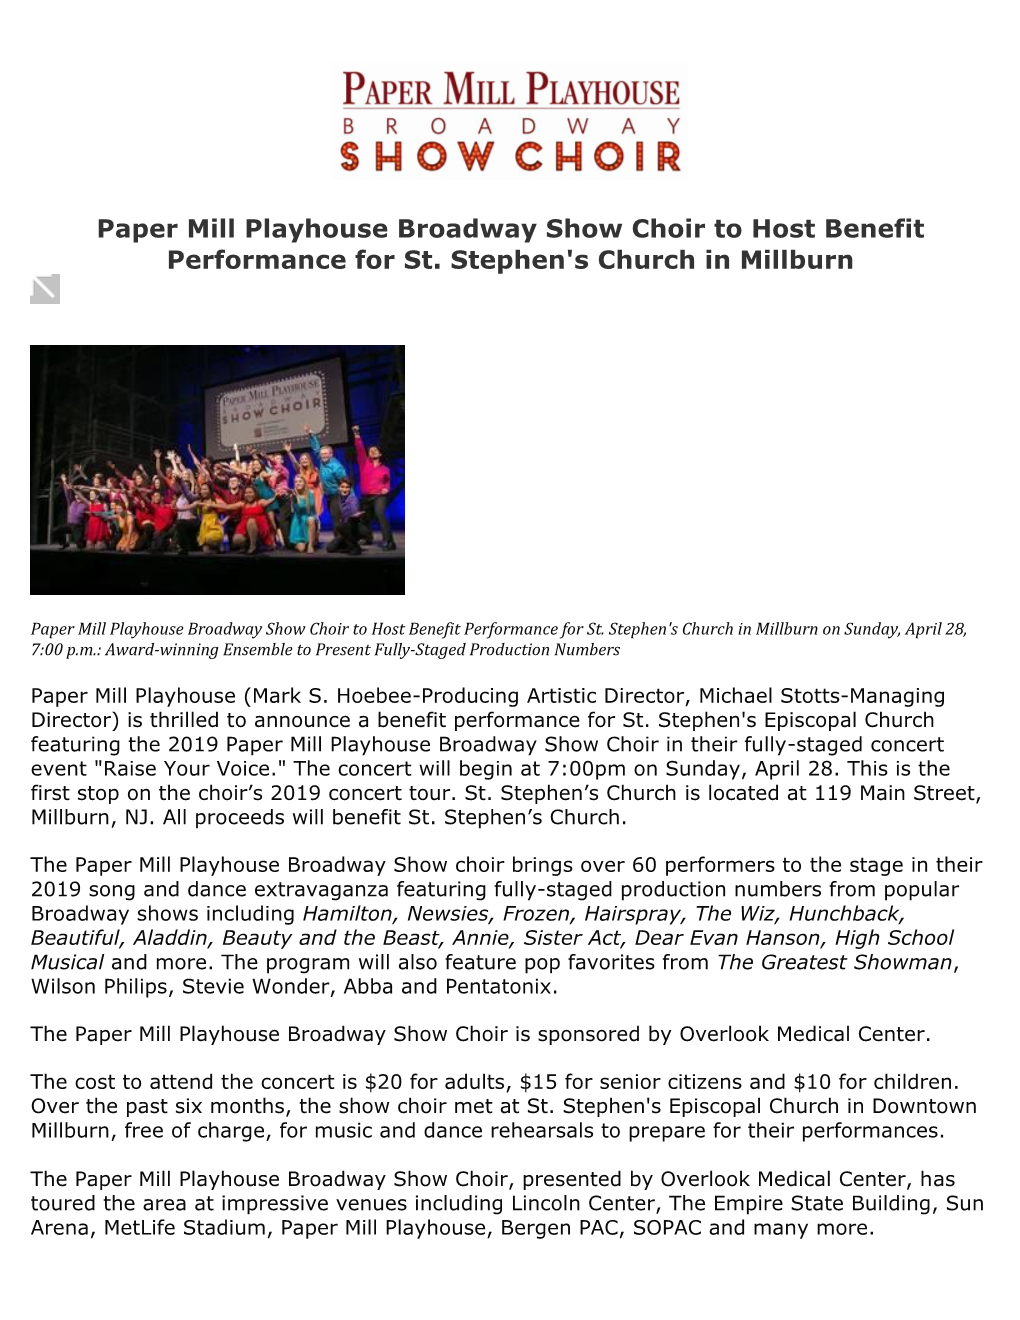 Paper Mill Playhouse Broadway Show Choir to Host Benefit Performance for St